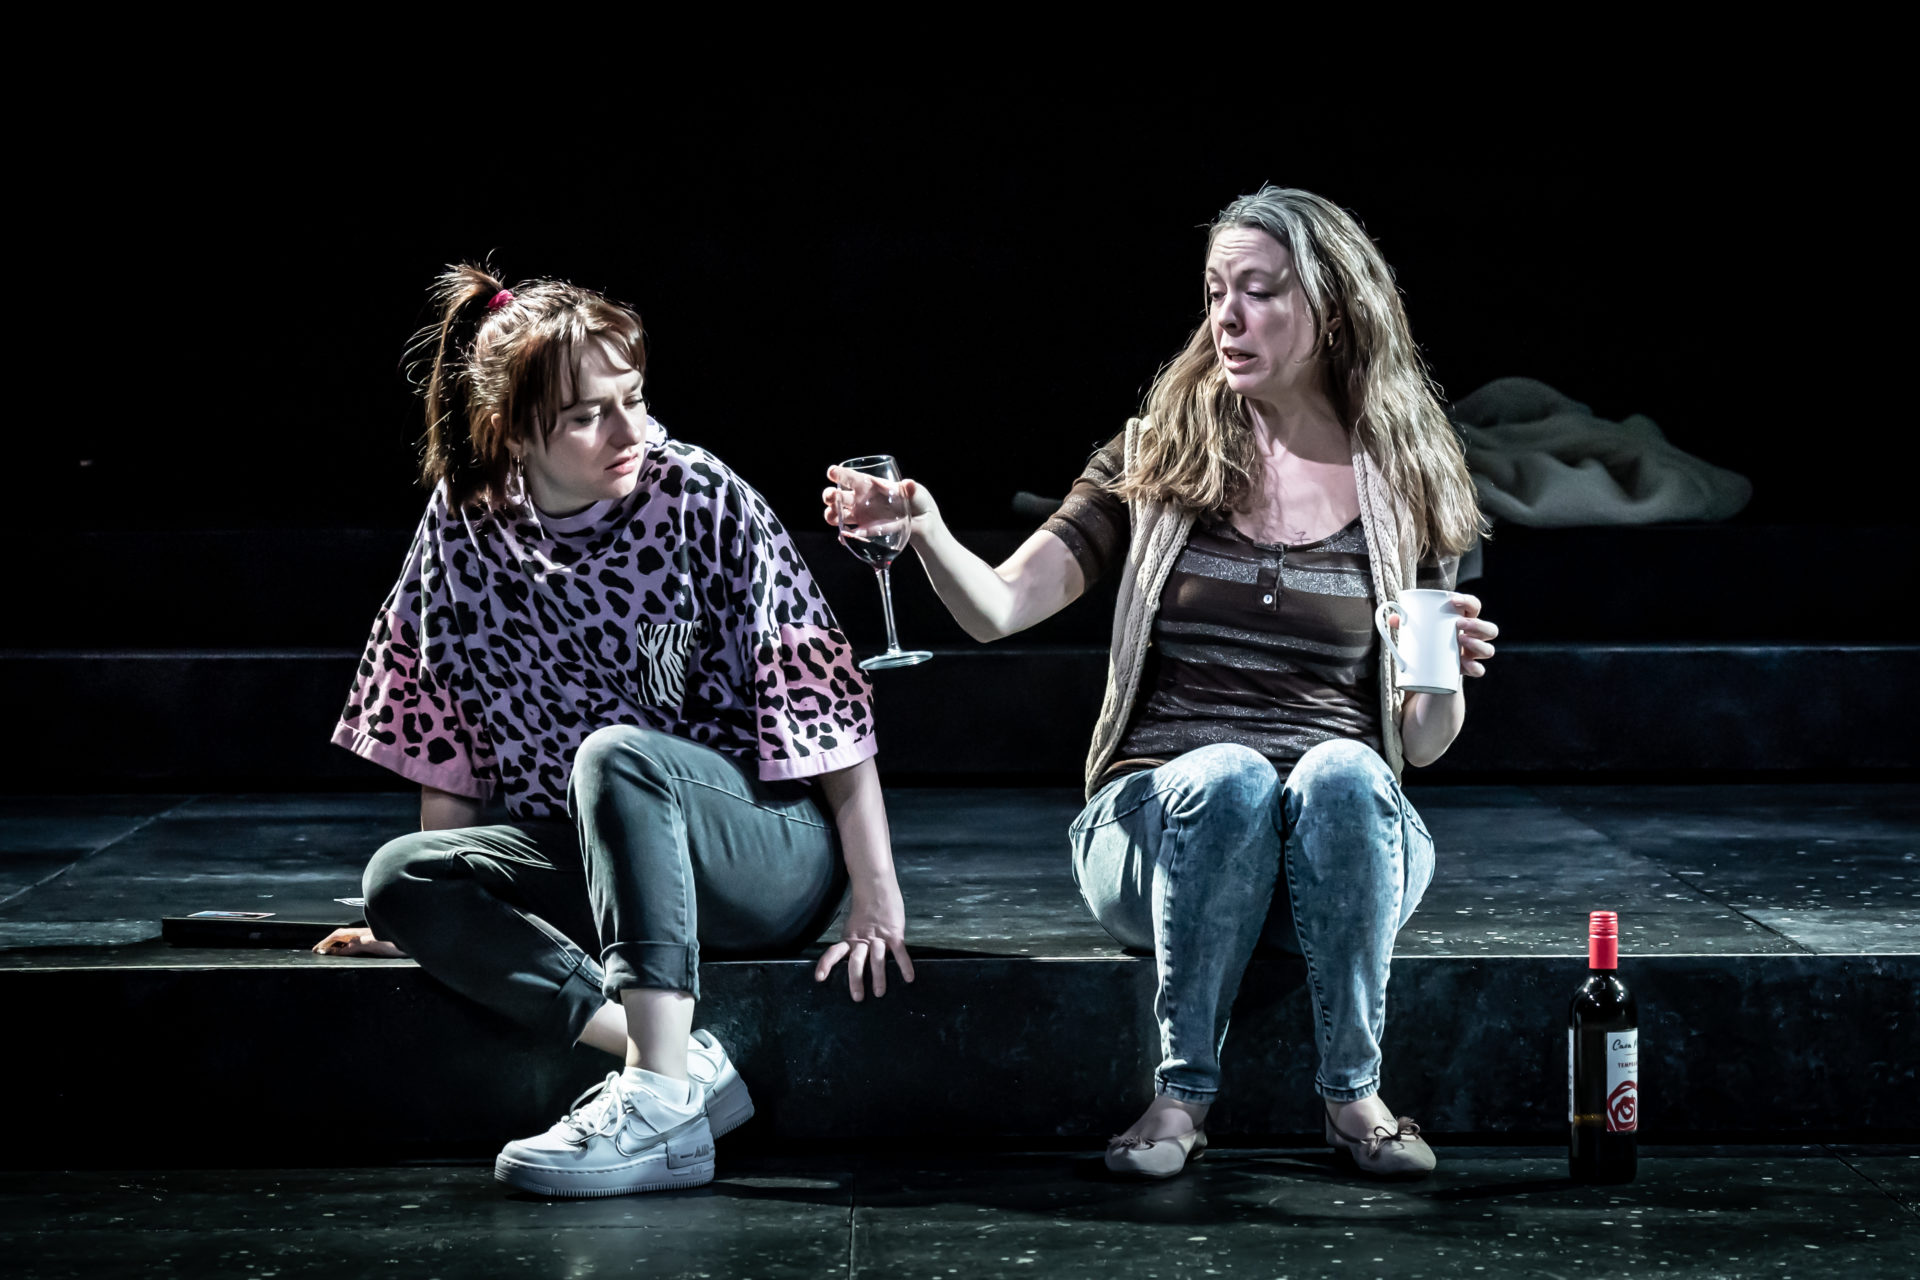 Rosie Sheehy as Julie and Catrin Aaron as Barb (c) Marc Brenner